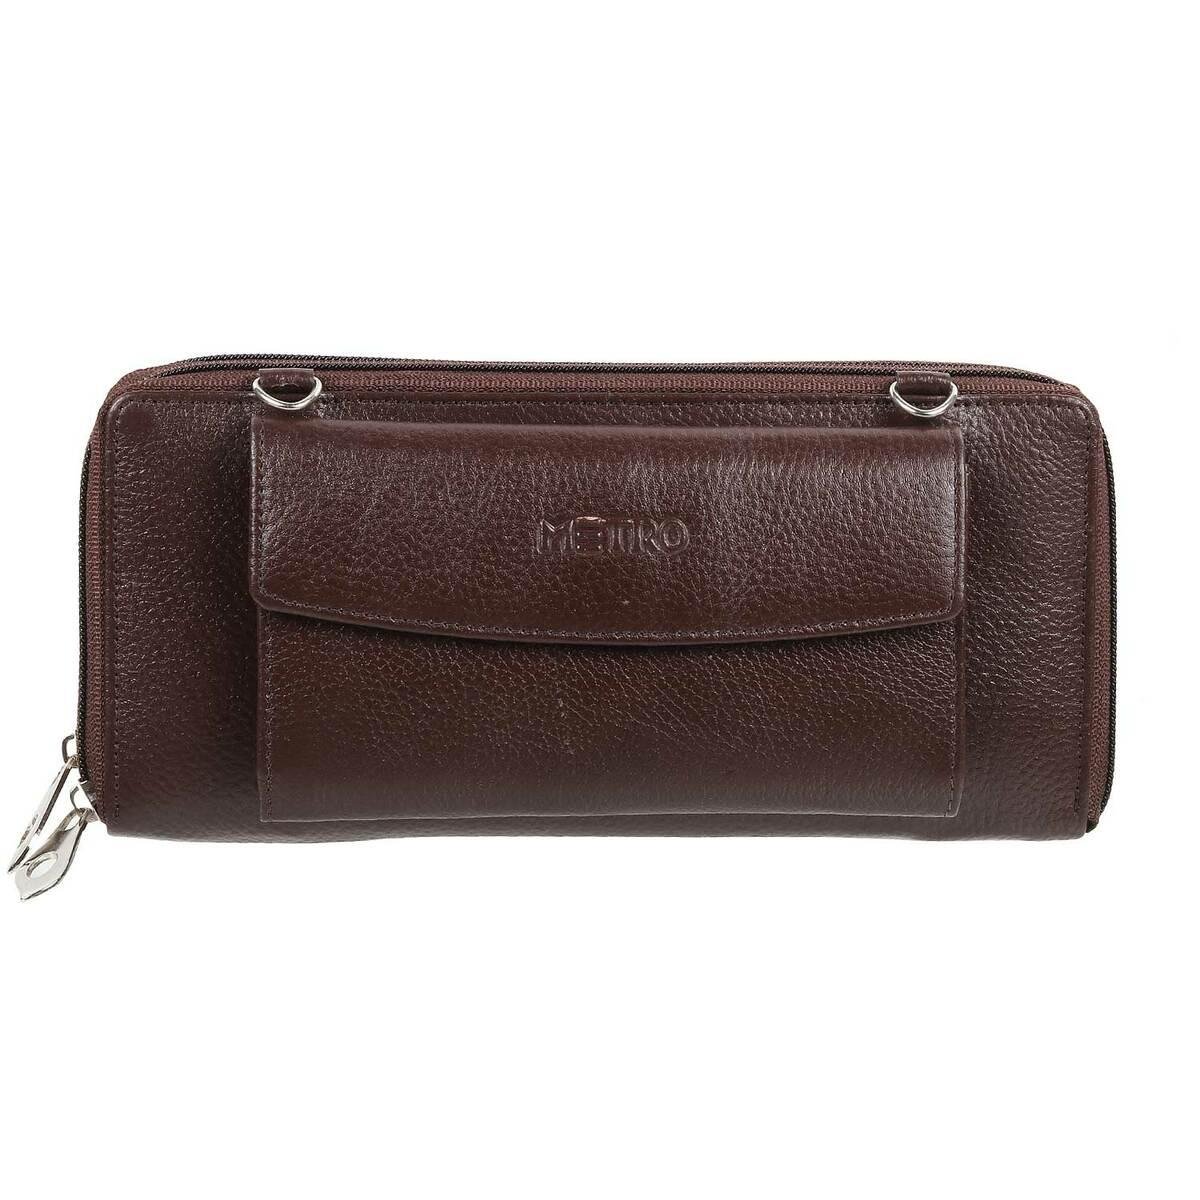 Buy Grays Lily Purse Antique Tan Leather With Suede only £38.50